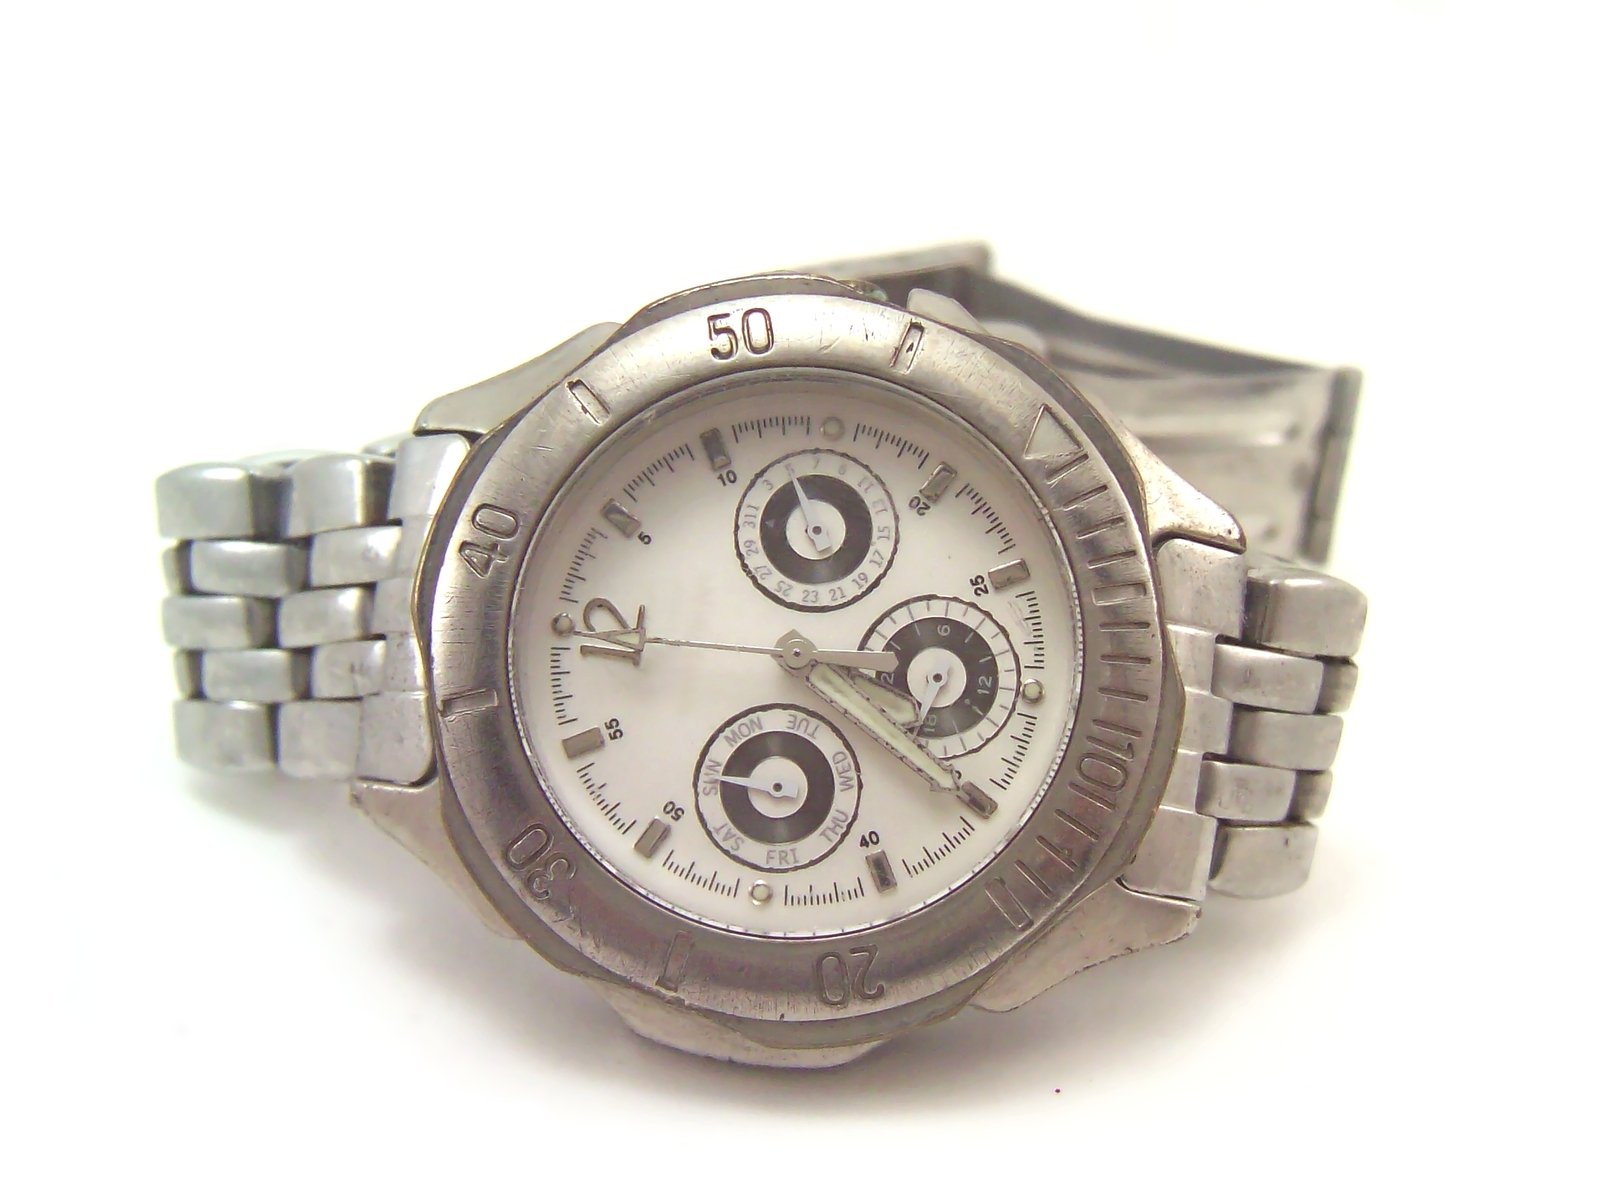 the watch is stainless steel and has white dials